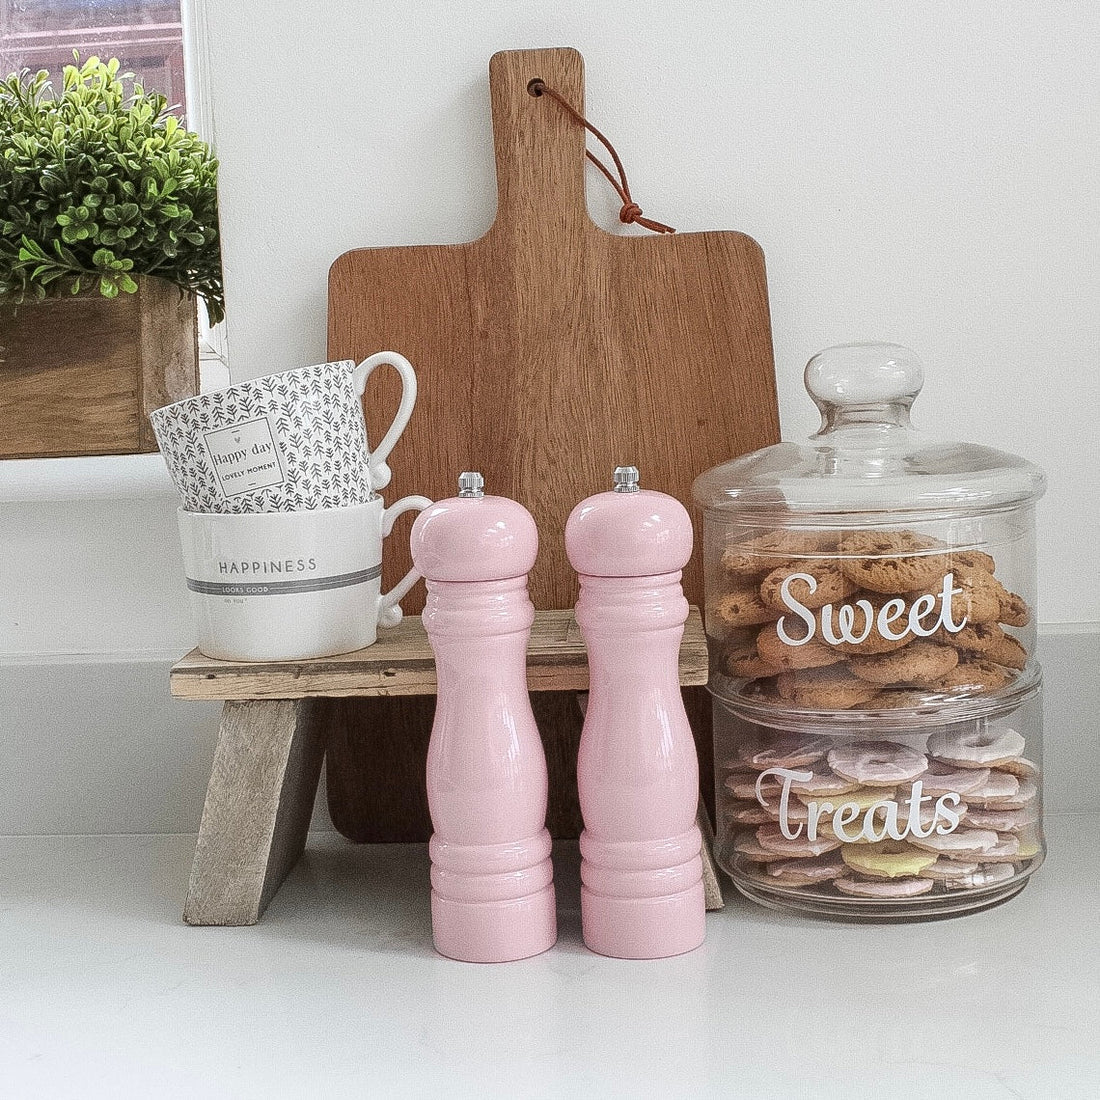 Colourful Salt and Pepper Mills: A Stylish Addition to Any Kitchen